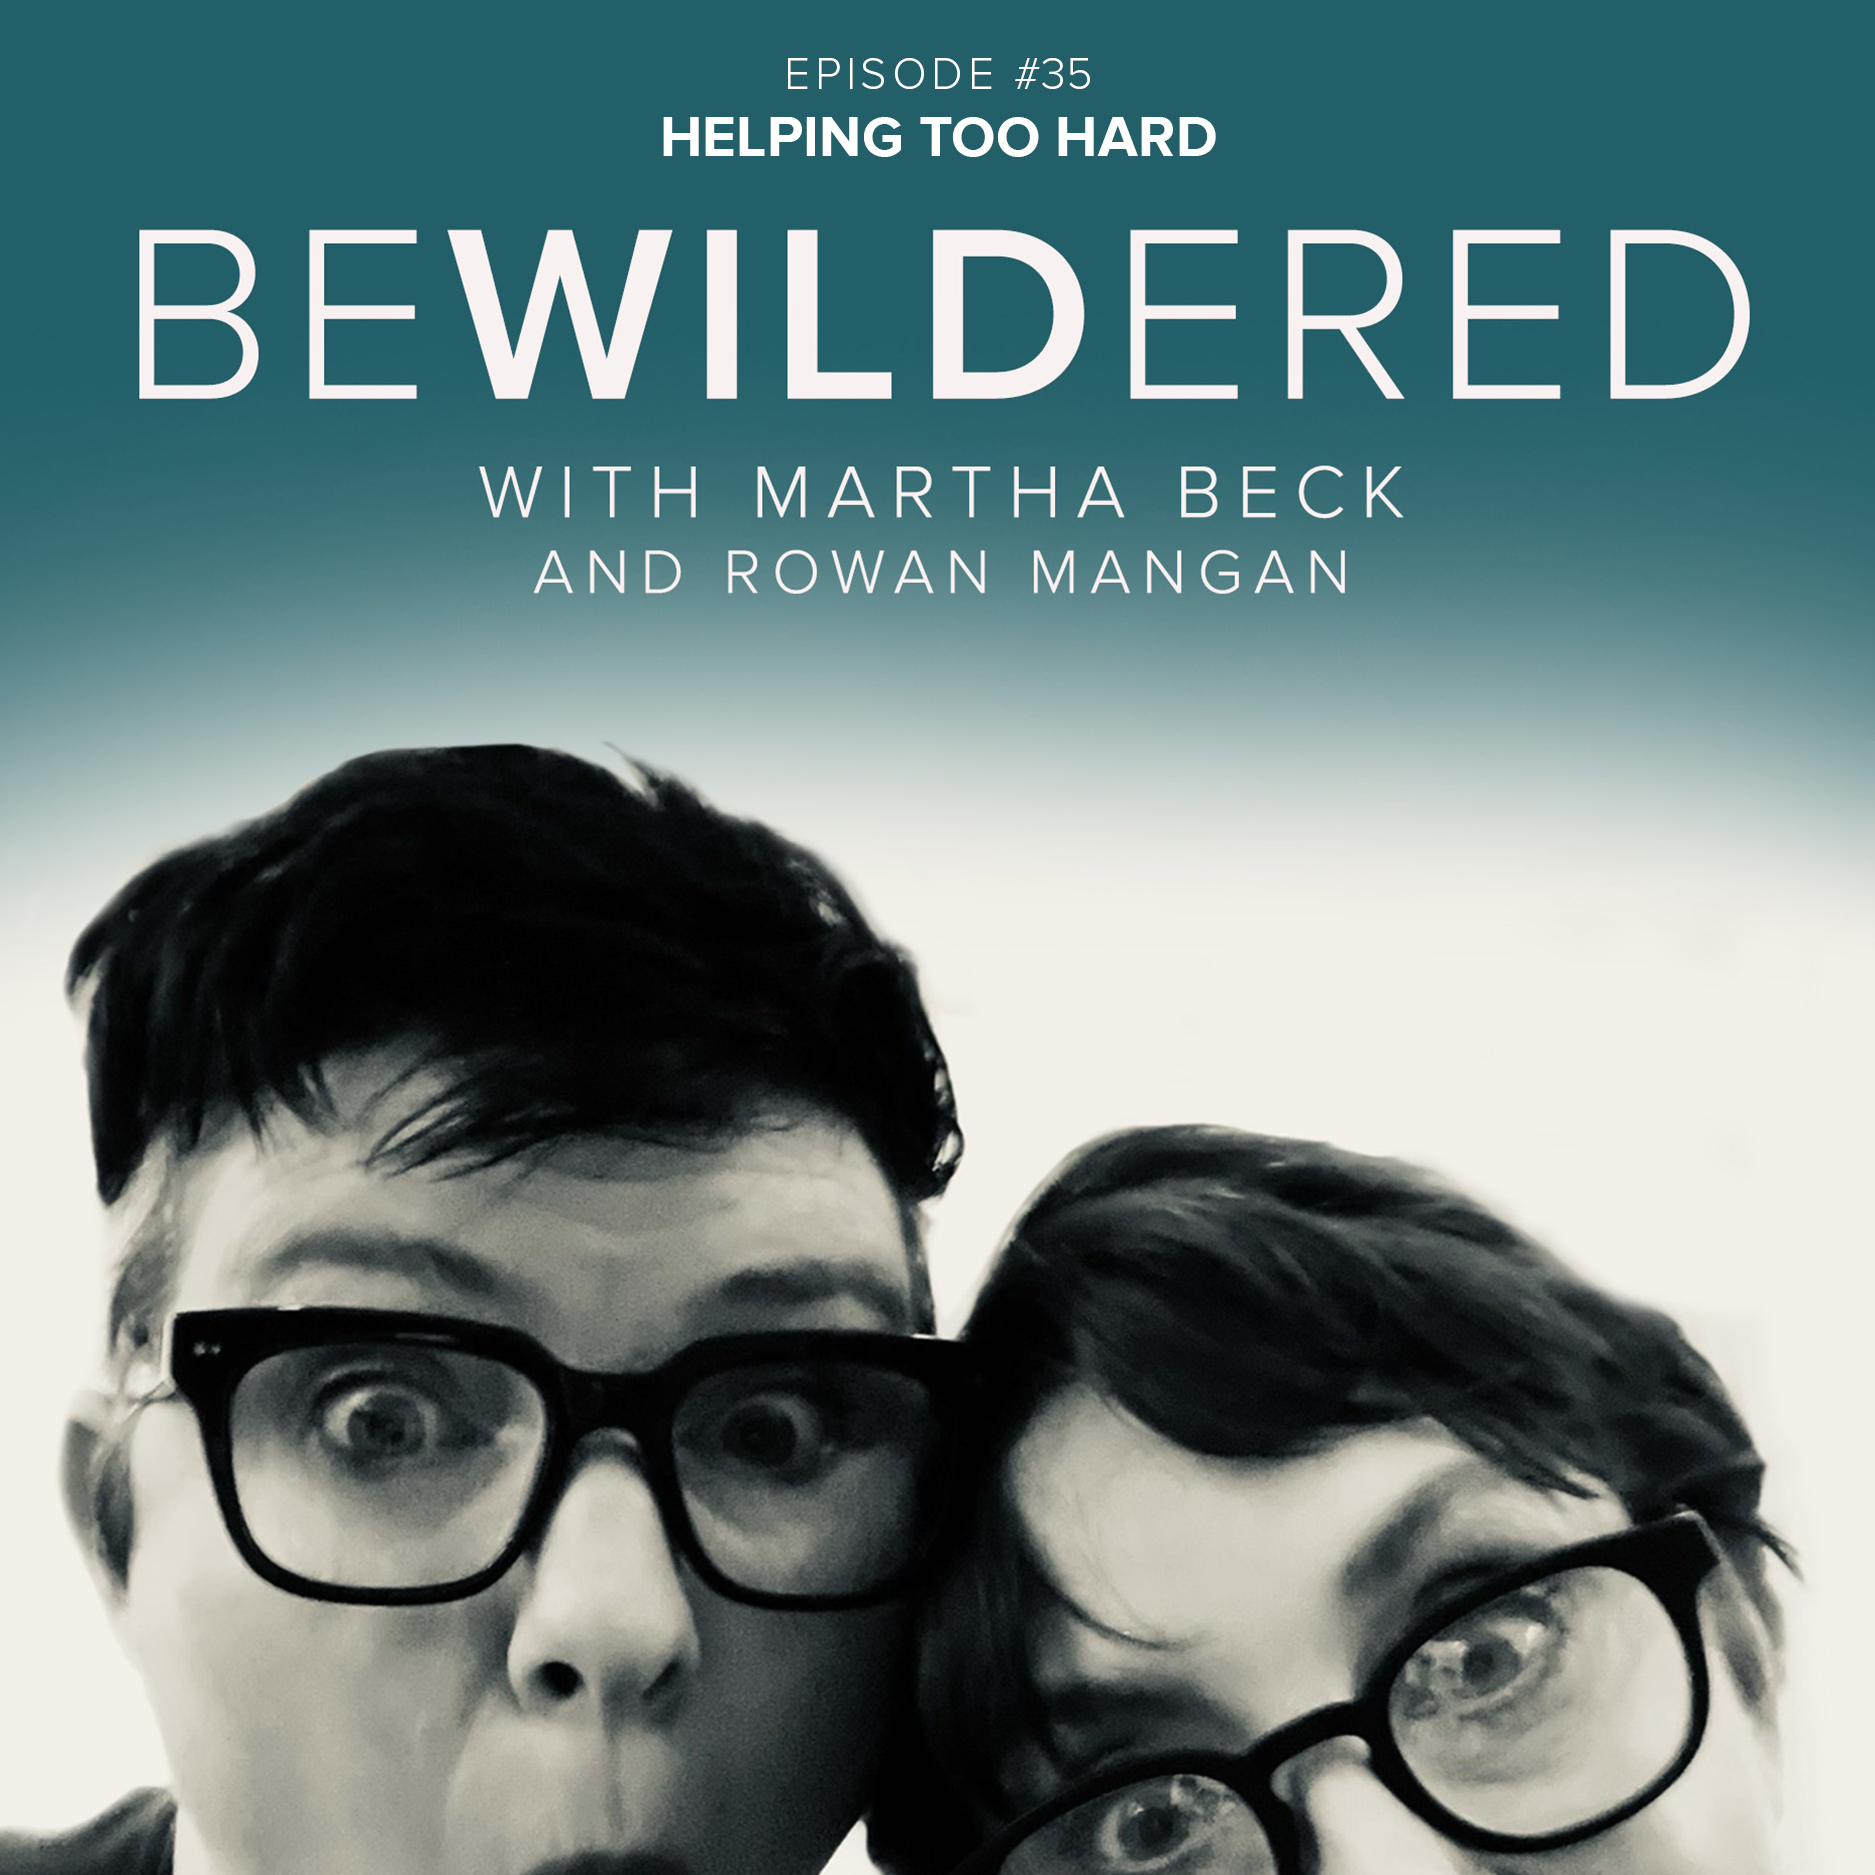 Image for Episode #35 Helping Too Hard for the Bewildered Podcast with Martha Beck and Rowan Mangan